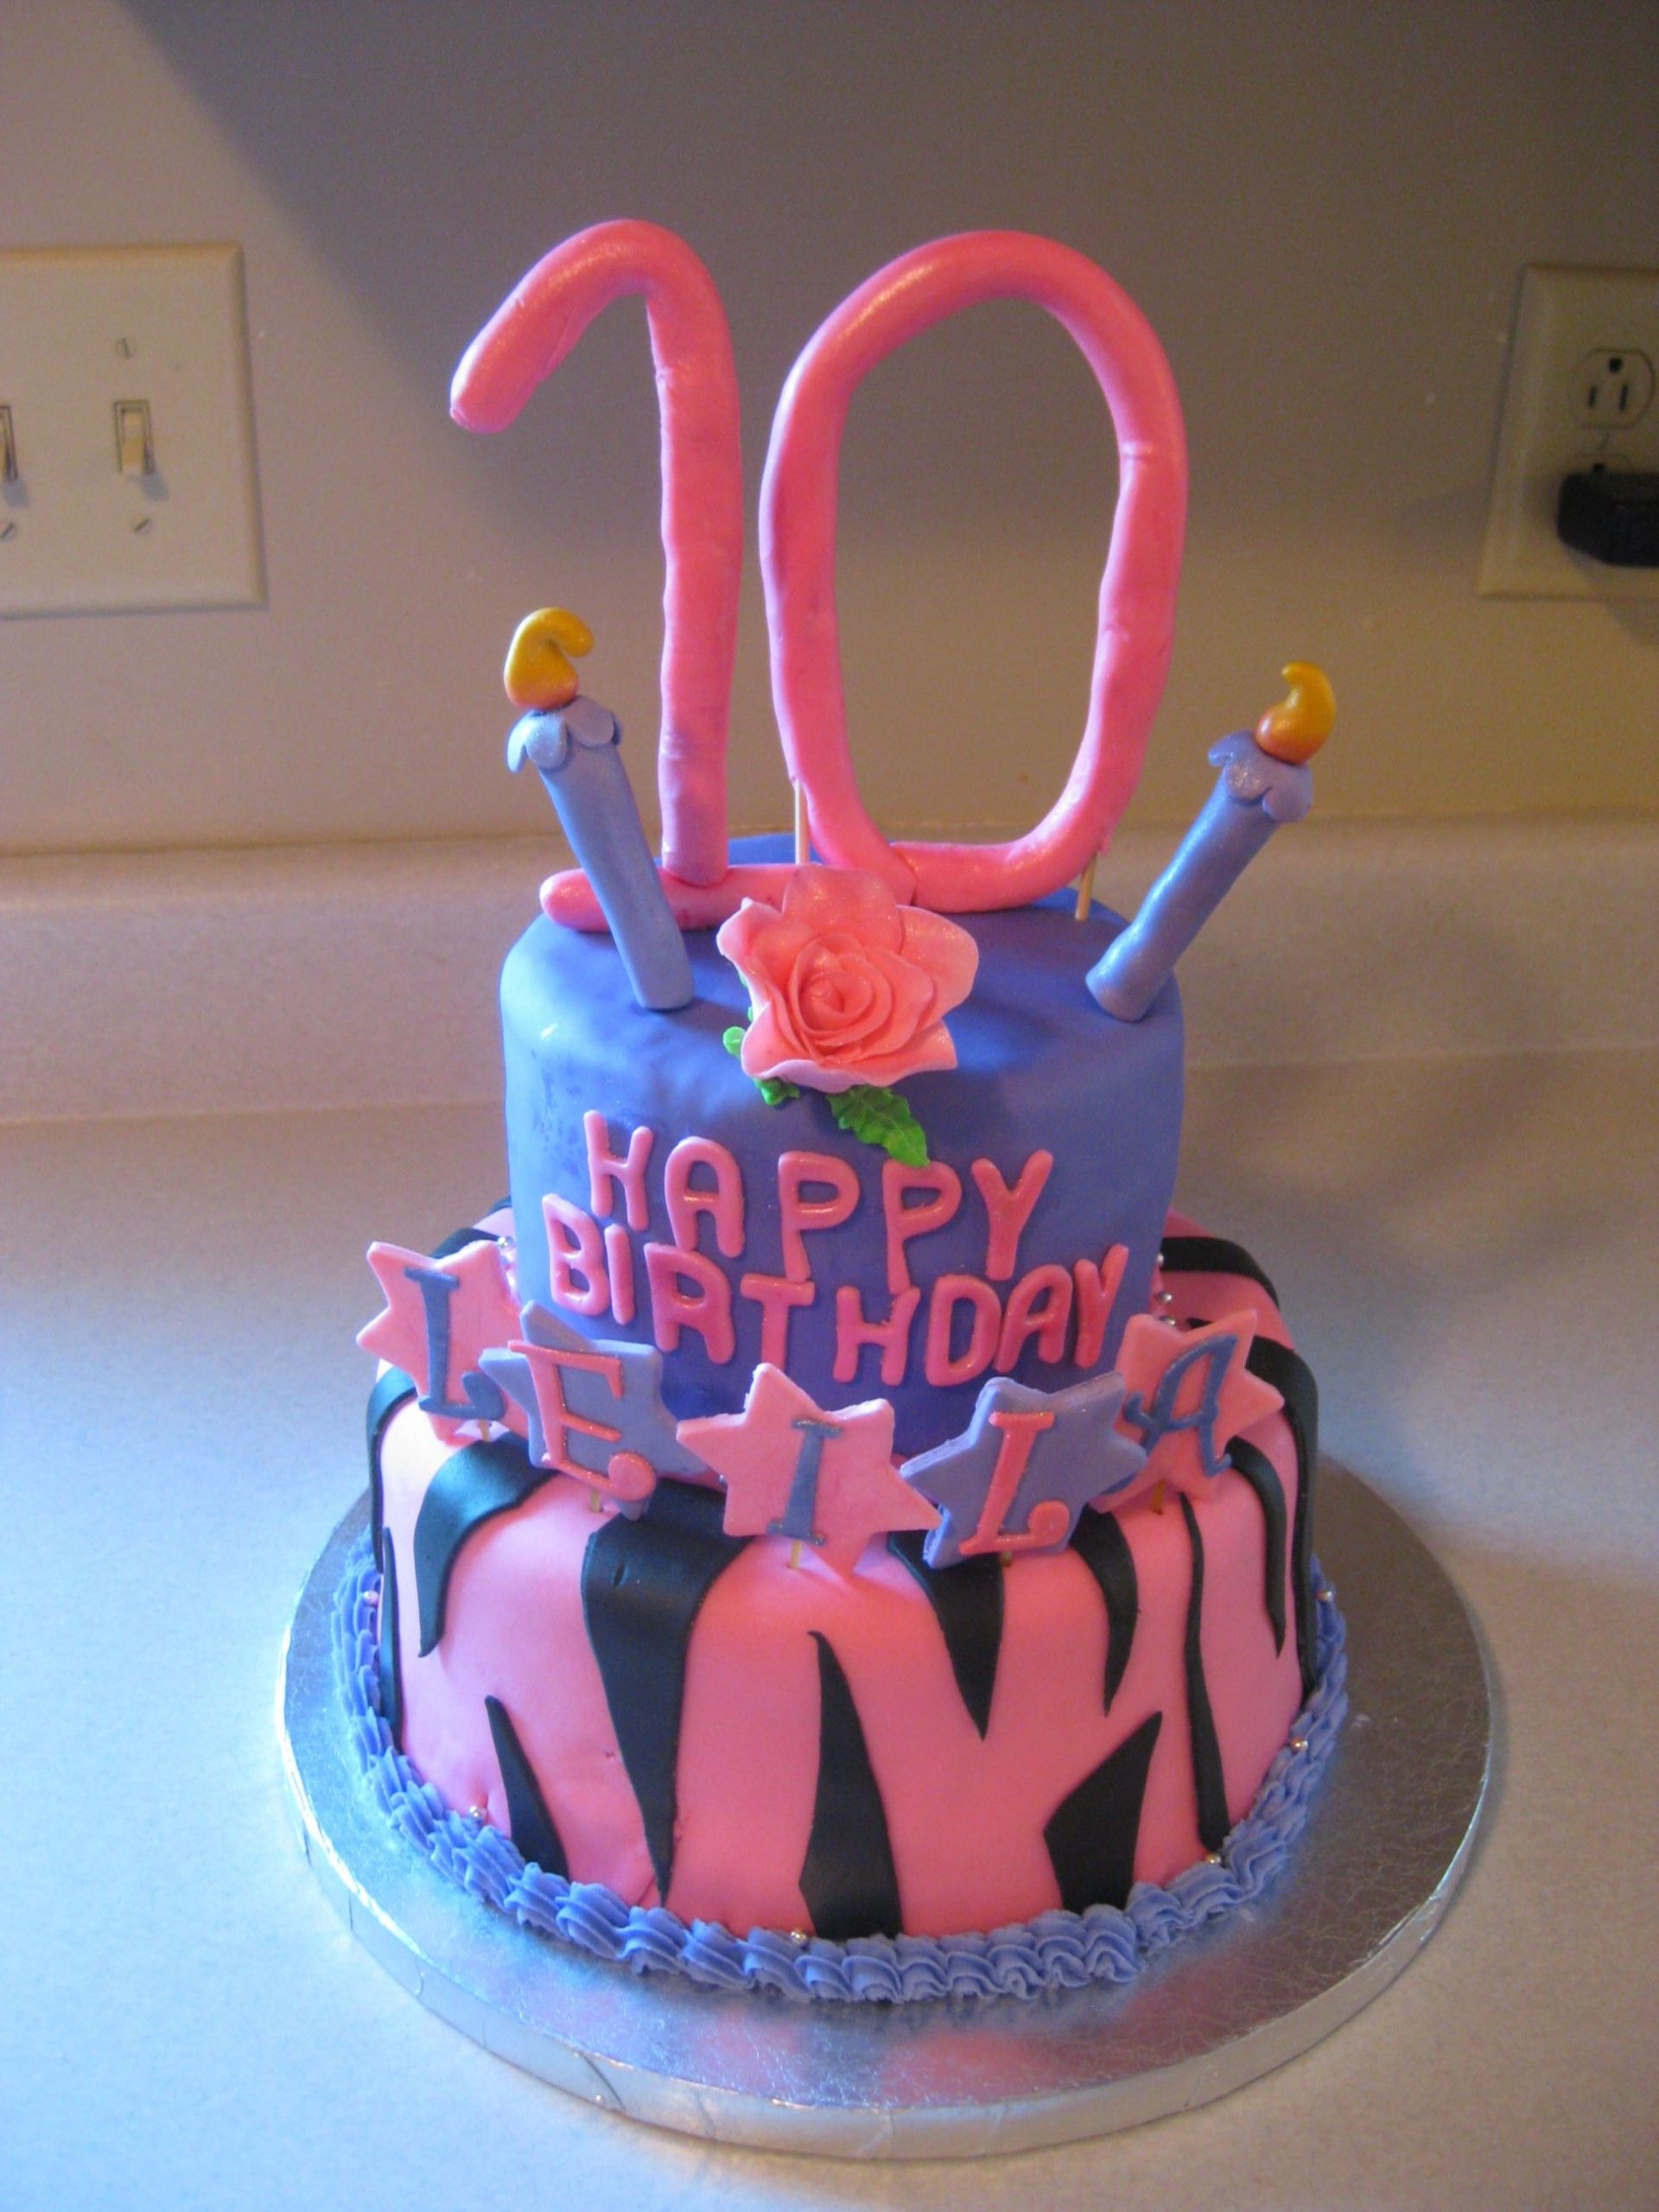 10 Year Old Birthday Cakes
 10 year old s birthday cake Chocolate cake with